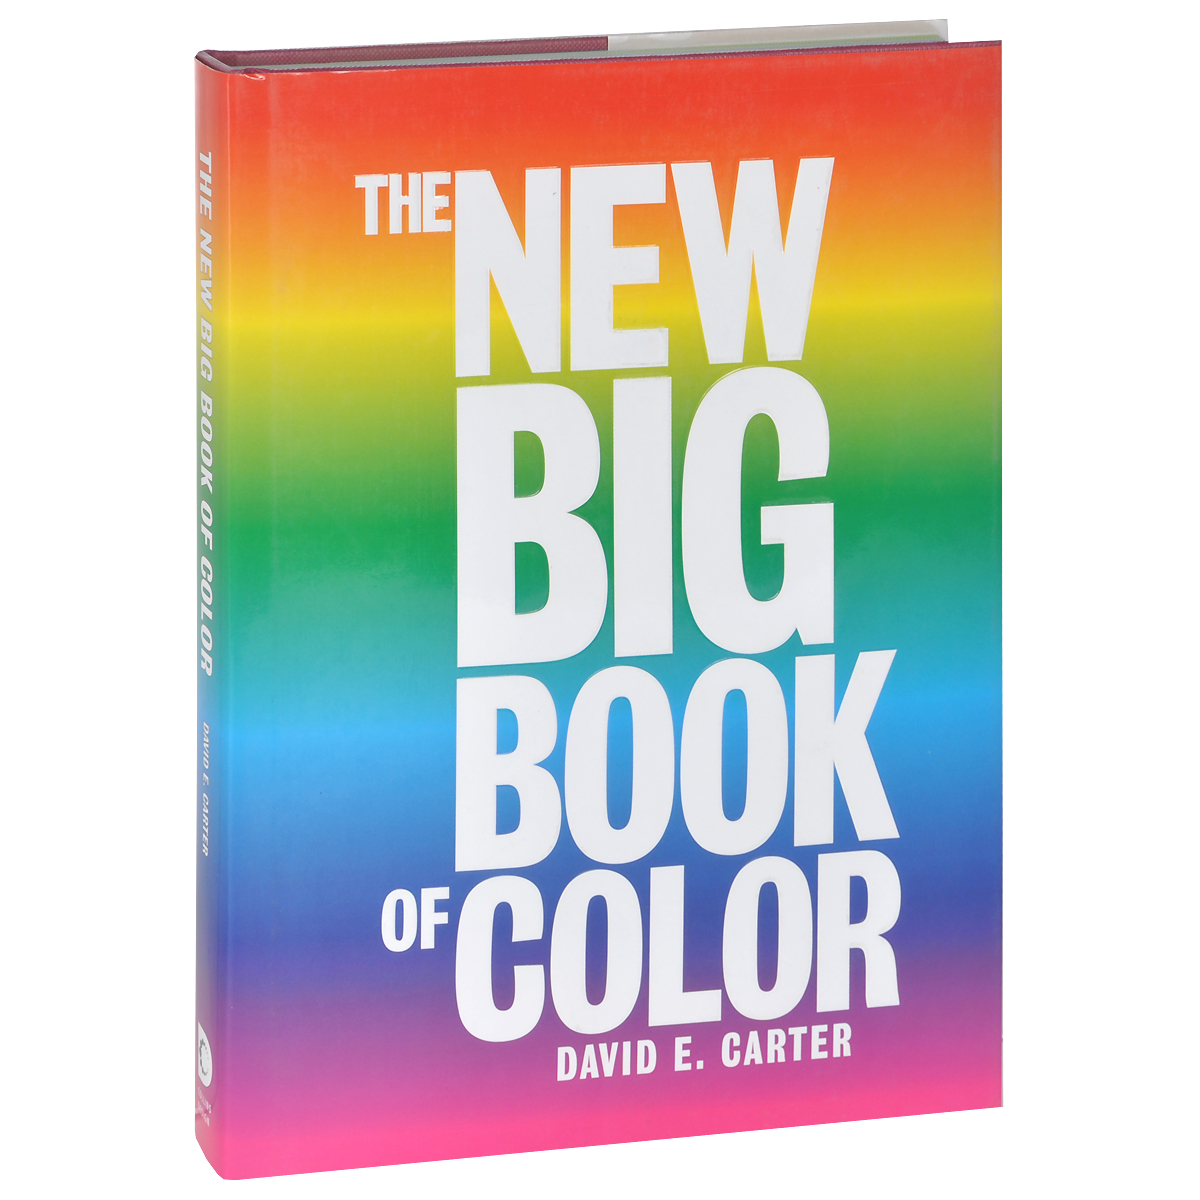 The New Big Book of Color